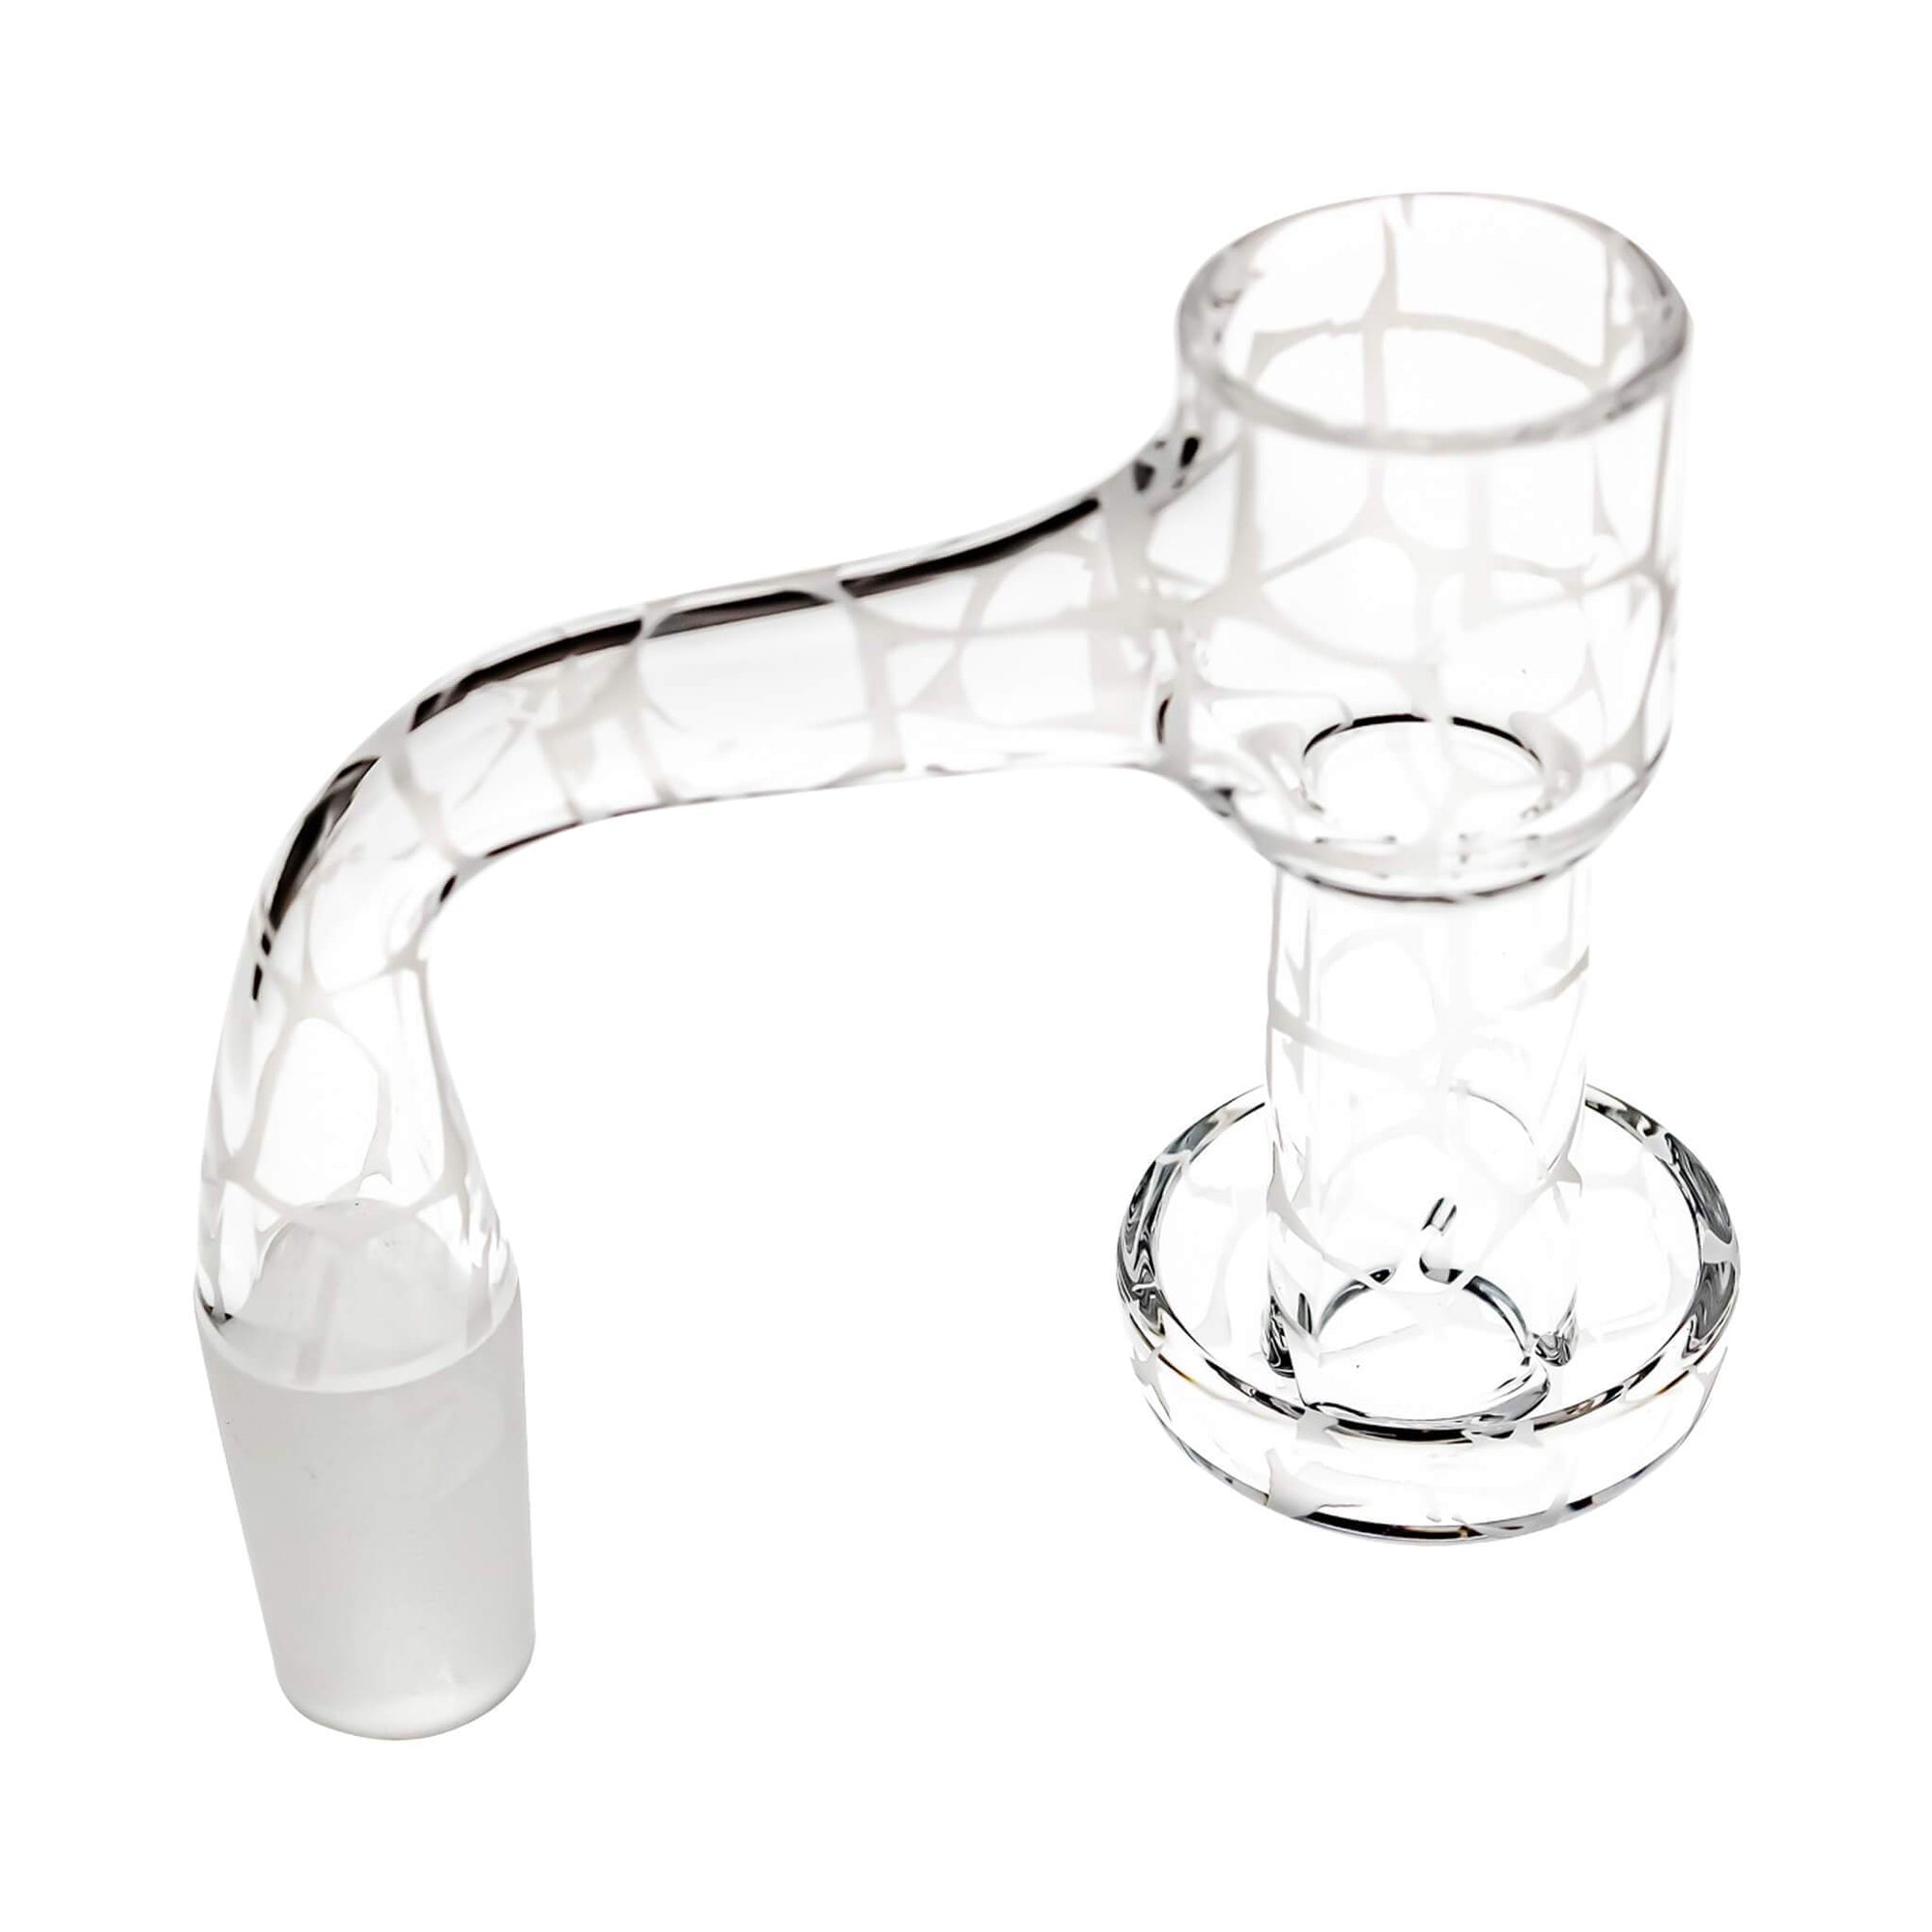 Full Weld Trippy Patterned Terp Slurper Tall VacTube Banger | Profile View | the dabbing specialists